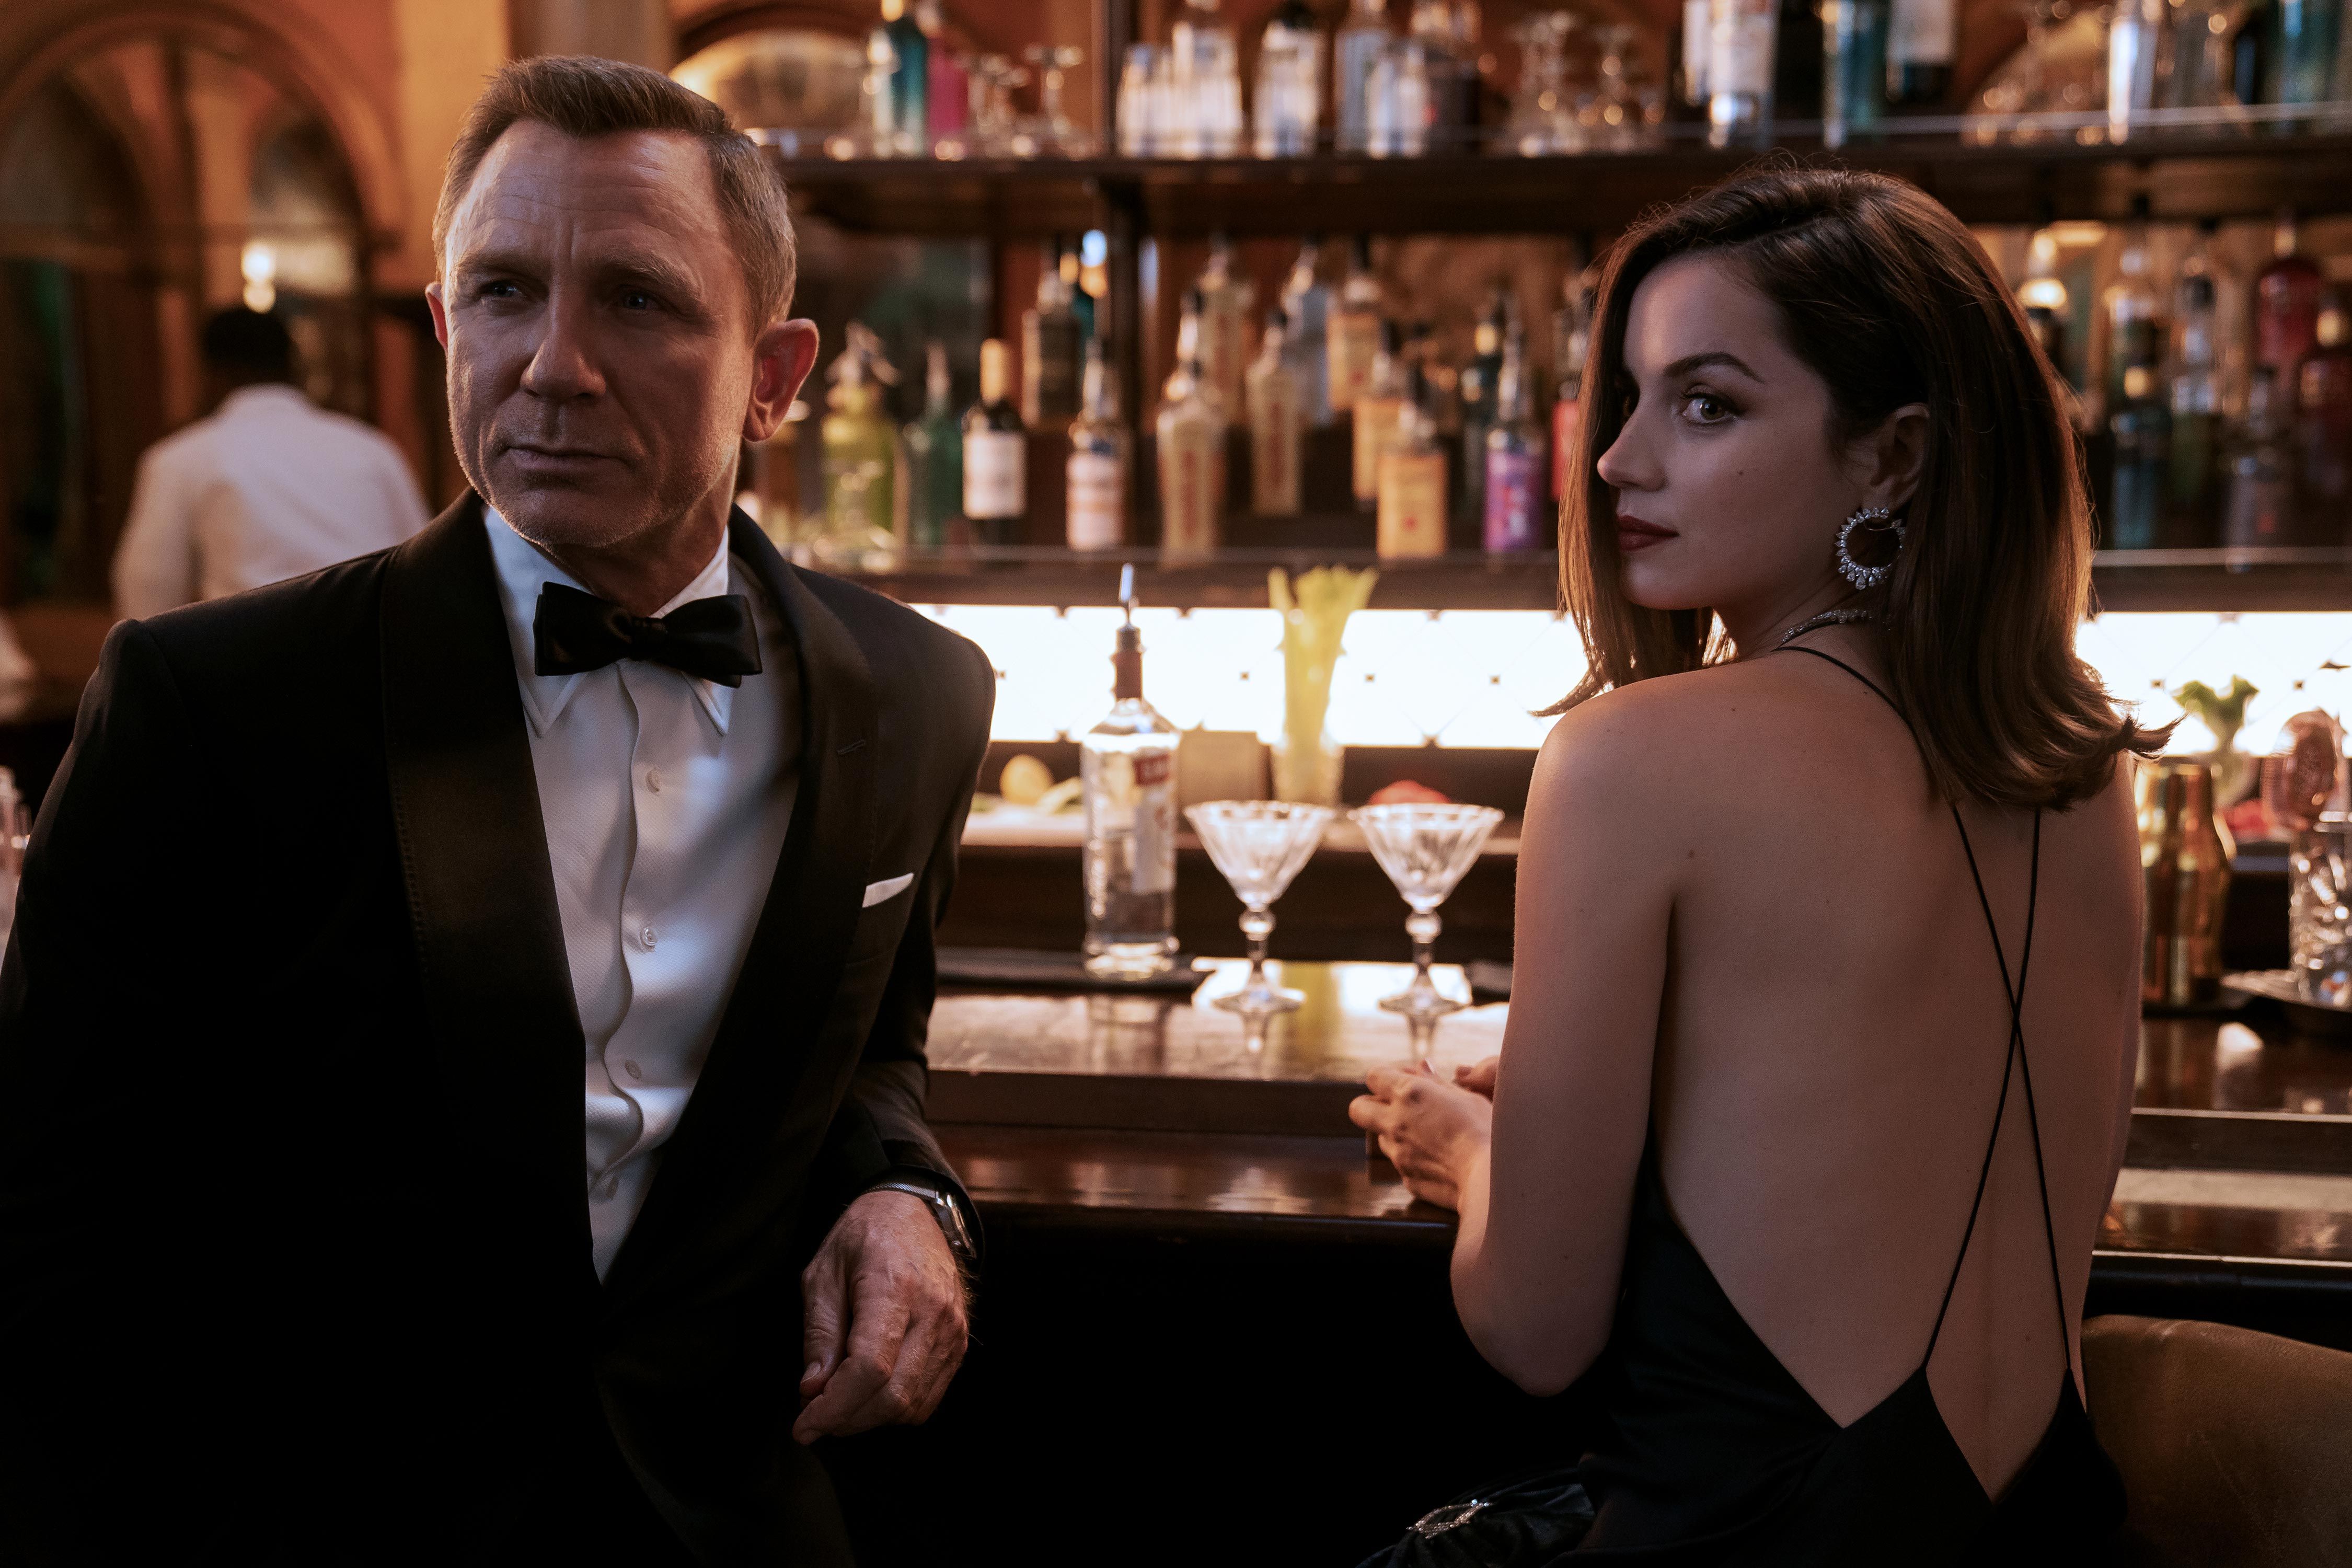 No Time to Die's lack of sex for James Bond isn't the problem